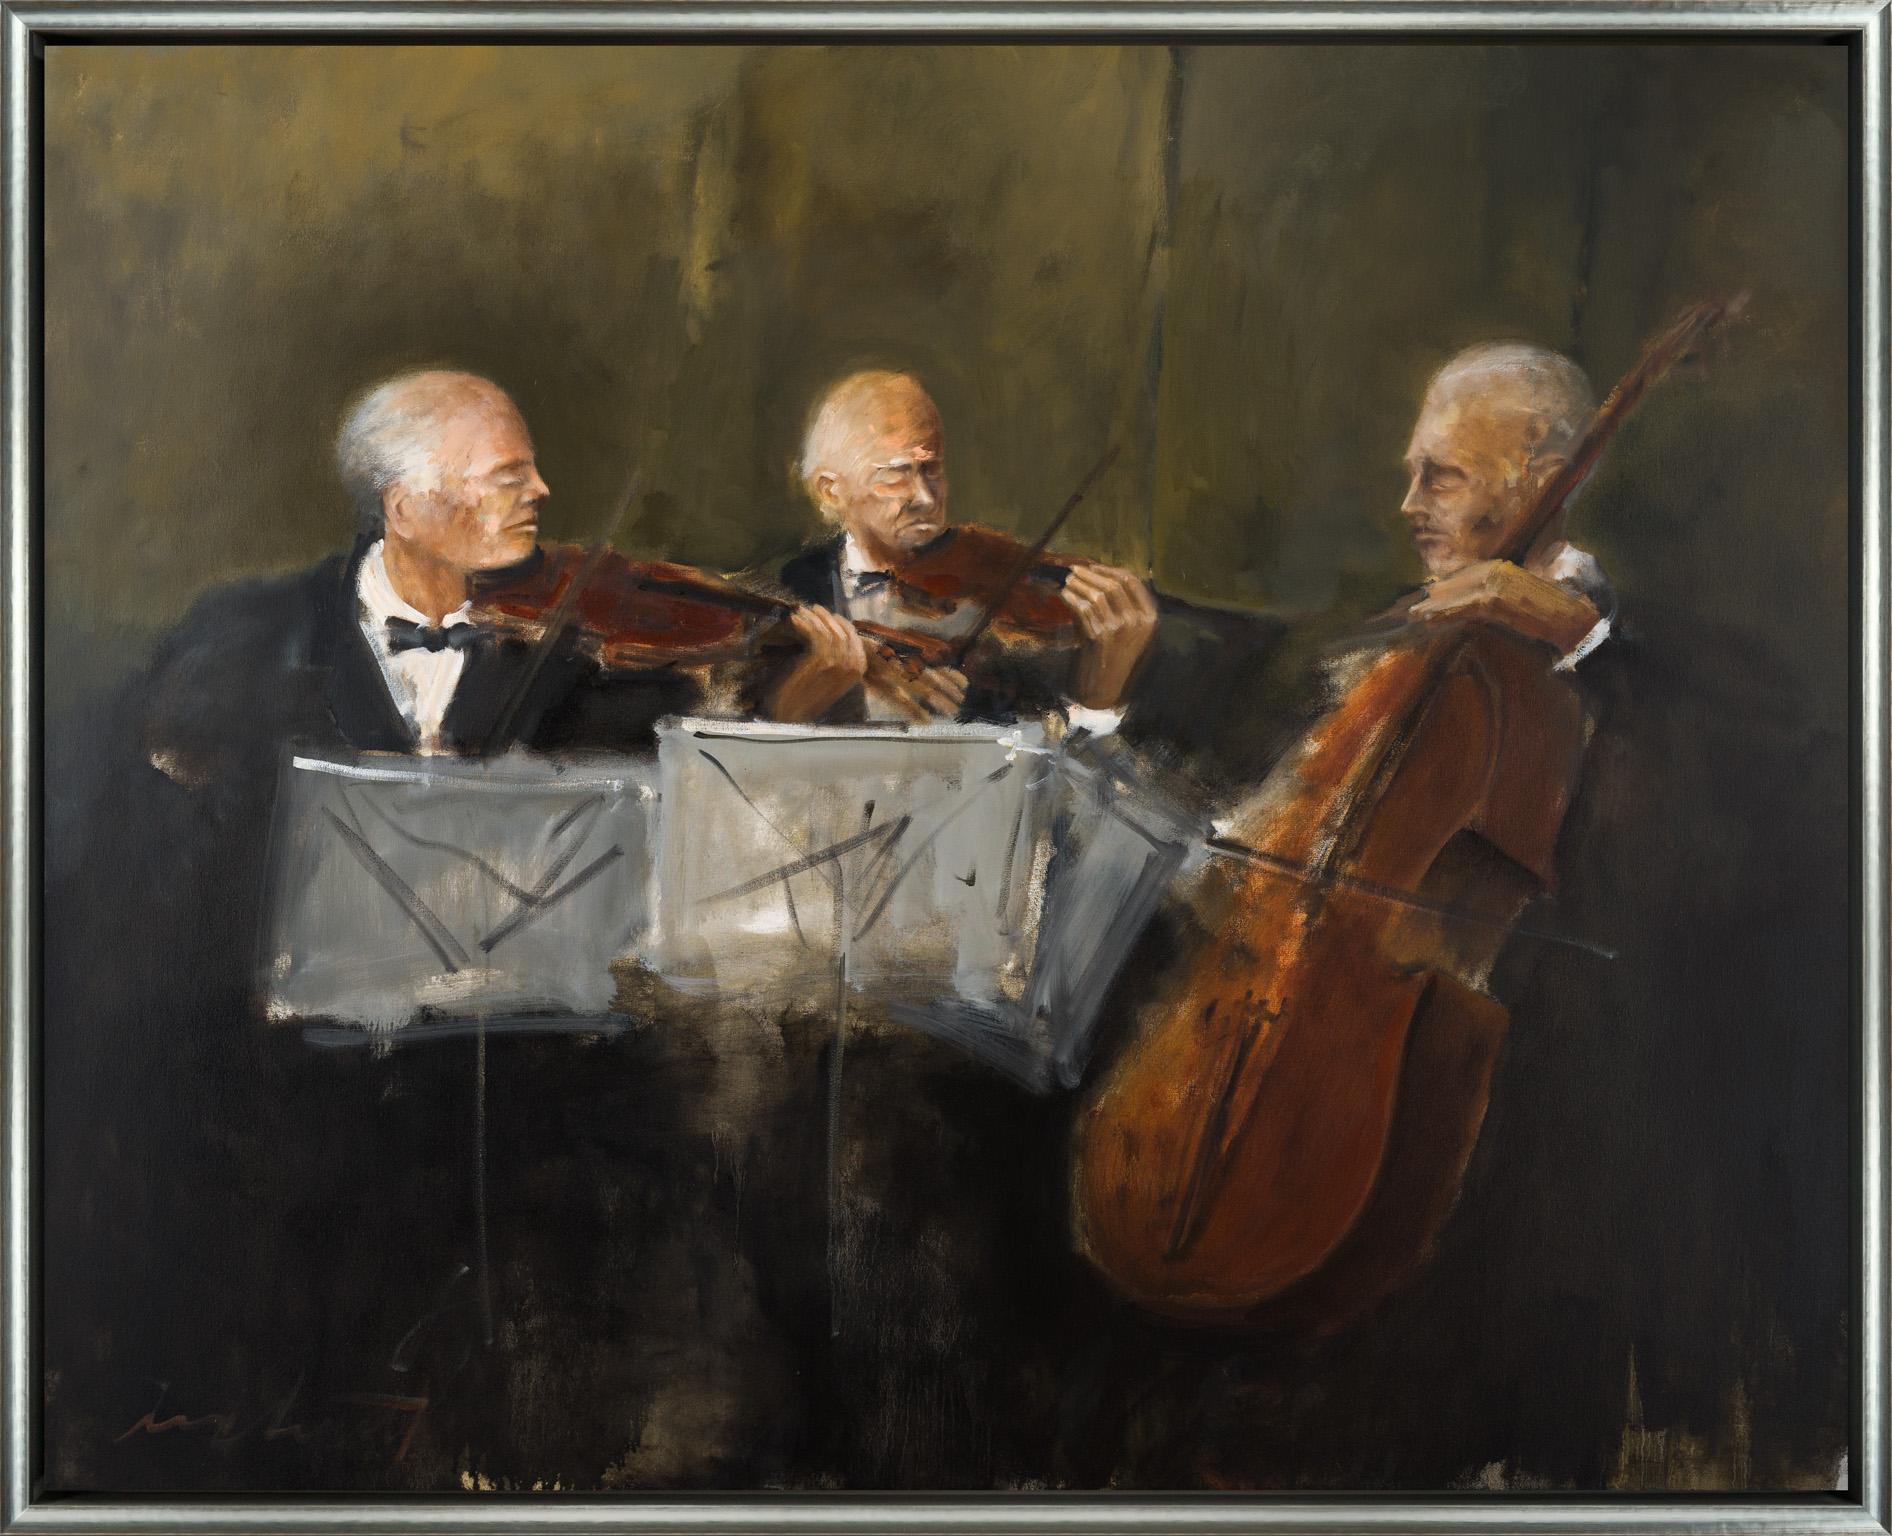 Eric Abrecht Figurative Painting - "Musician Trio" Loosely Painted Classical Musicians in Oil Paint